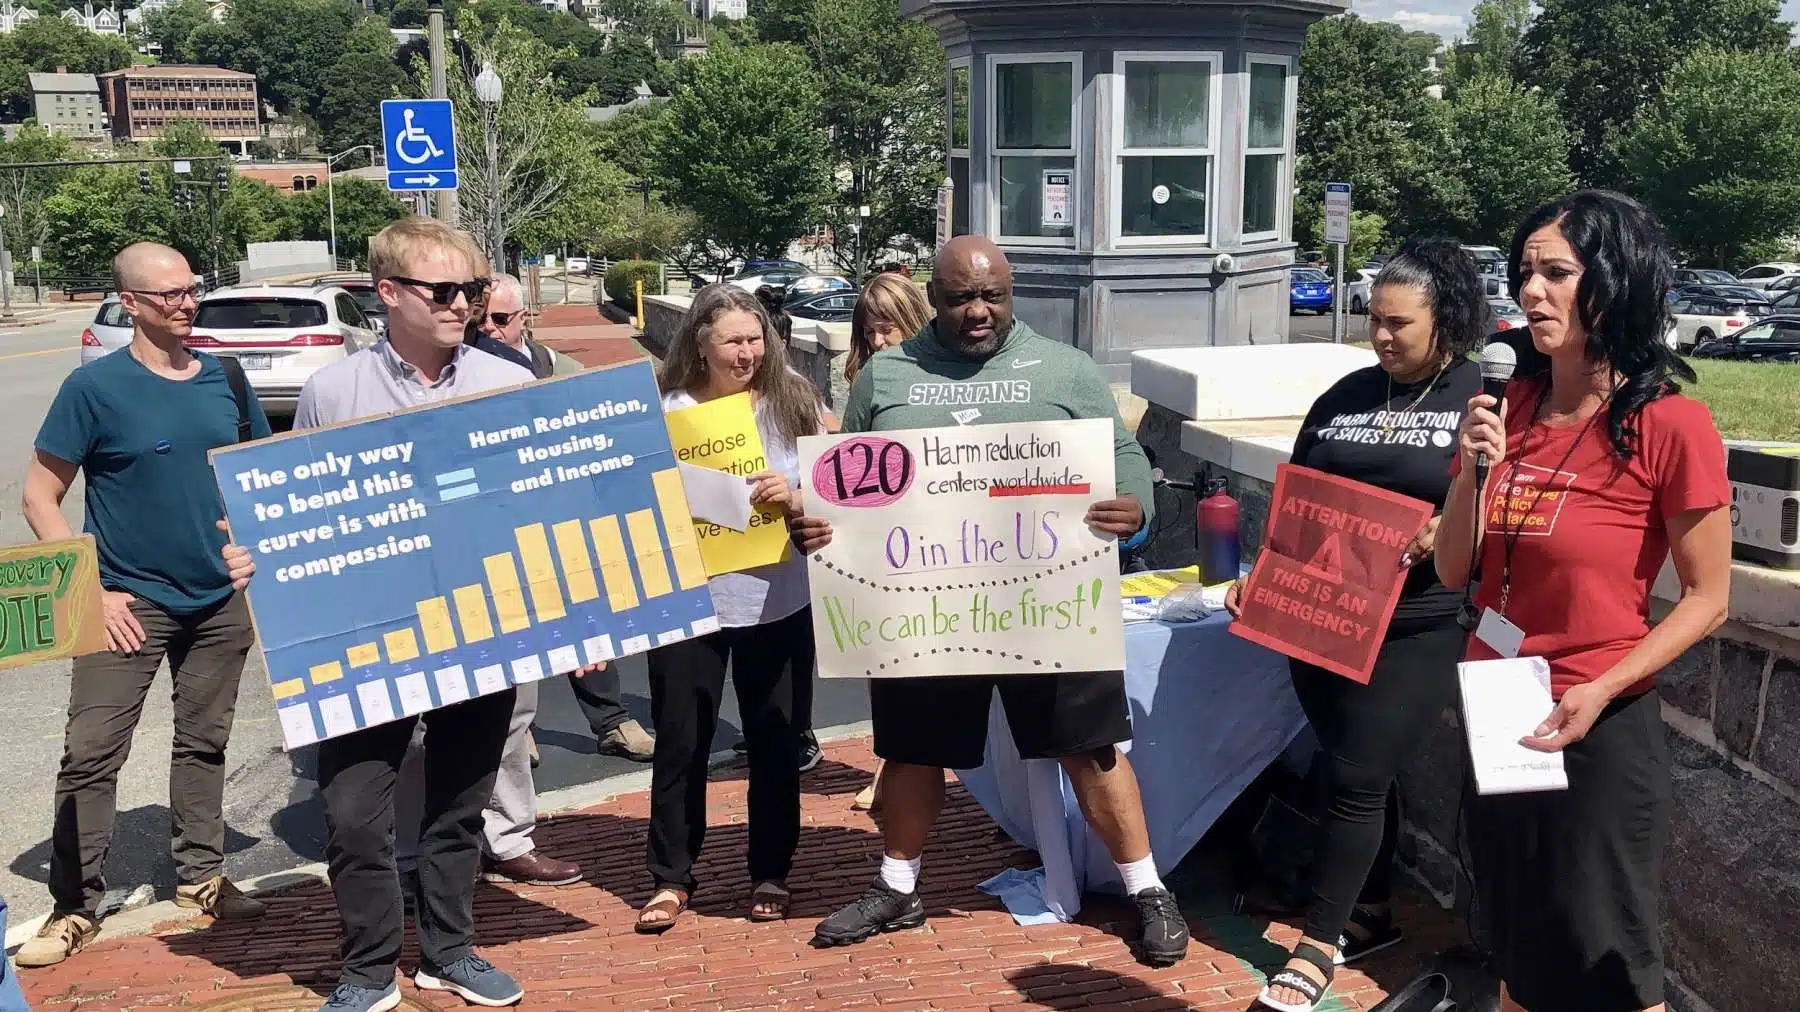 Rhode Island News: Advocates rally at state house in support of overdose prevention legislation